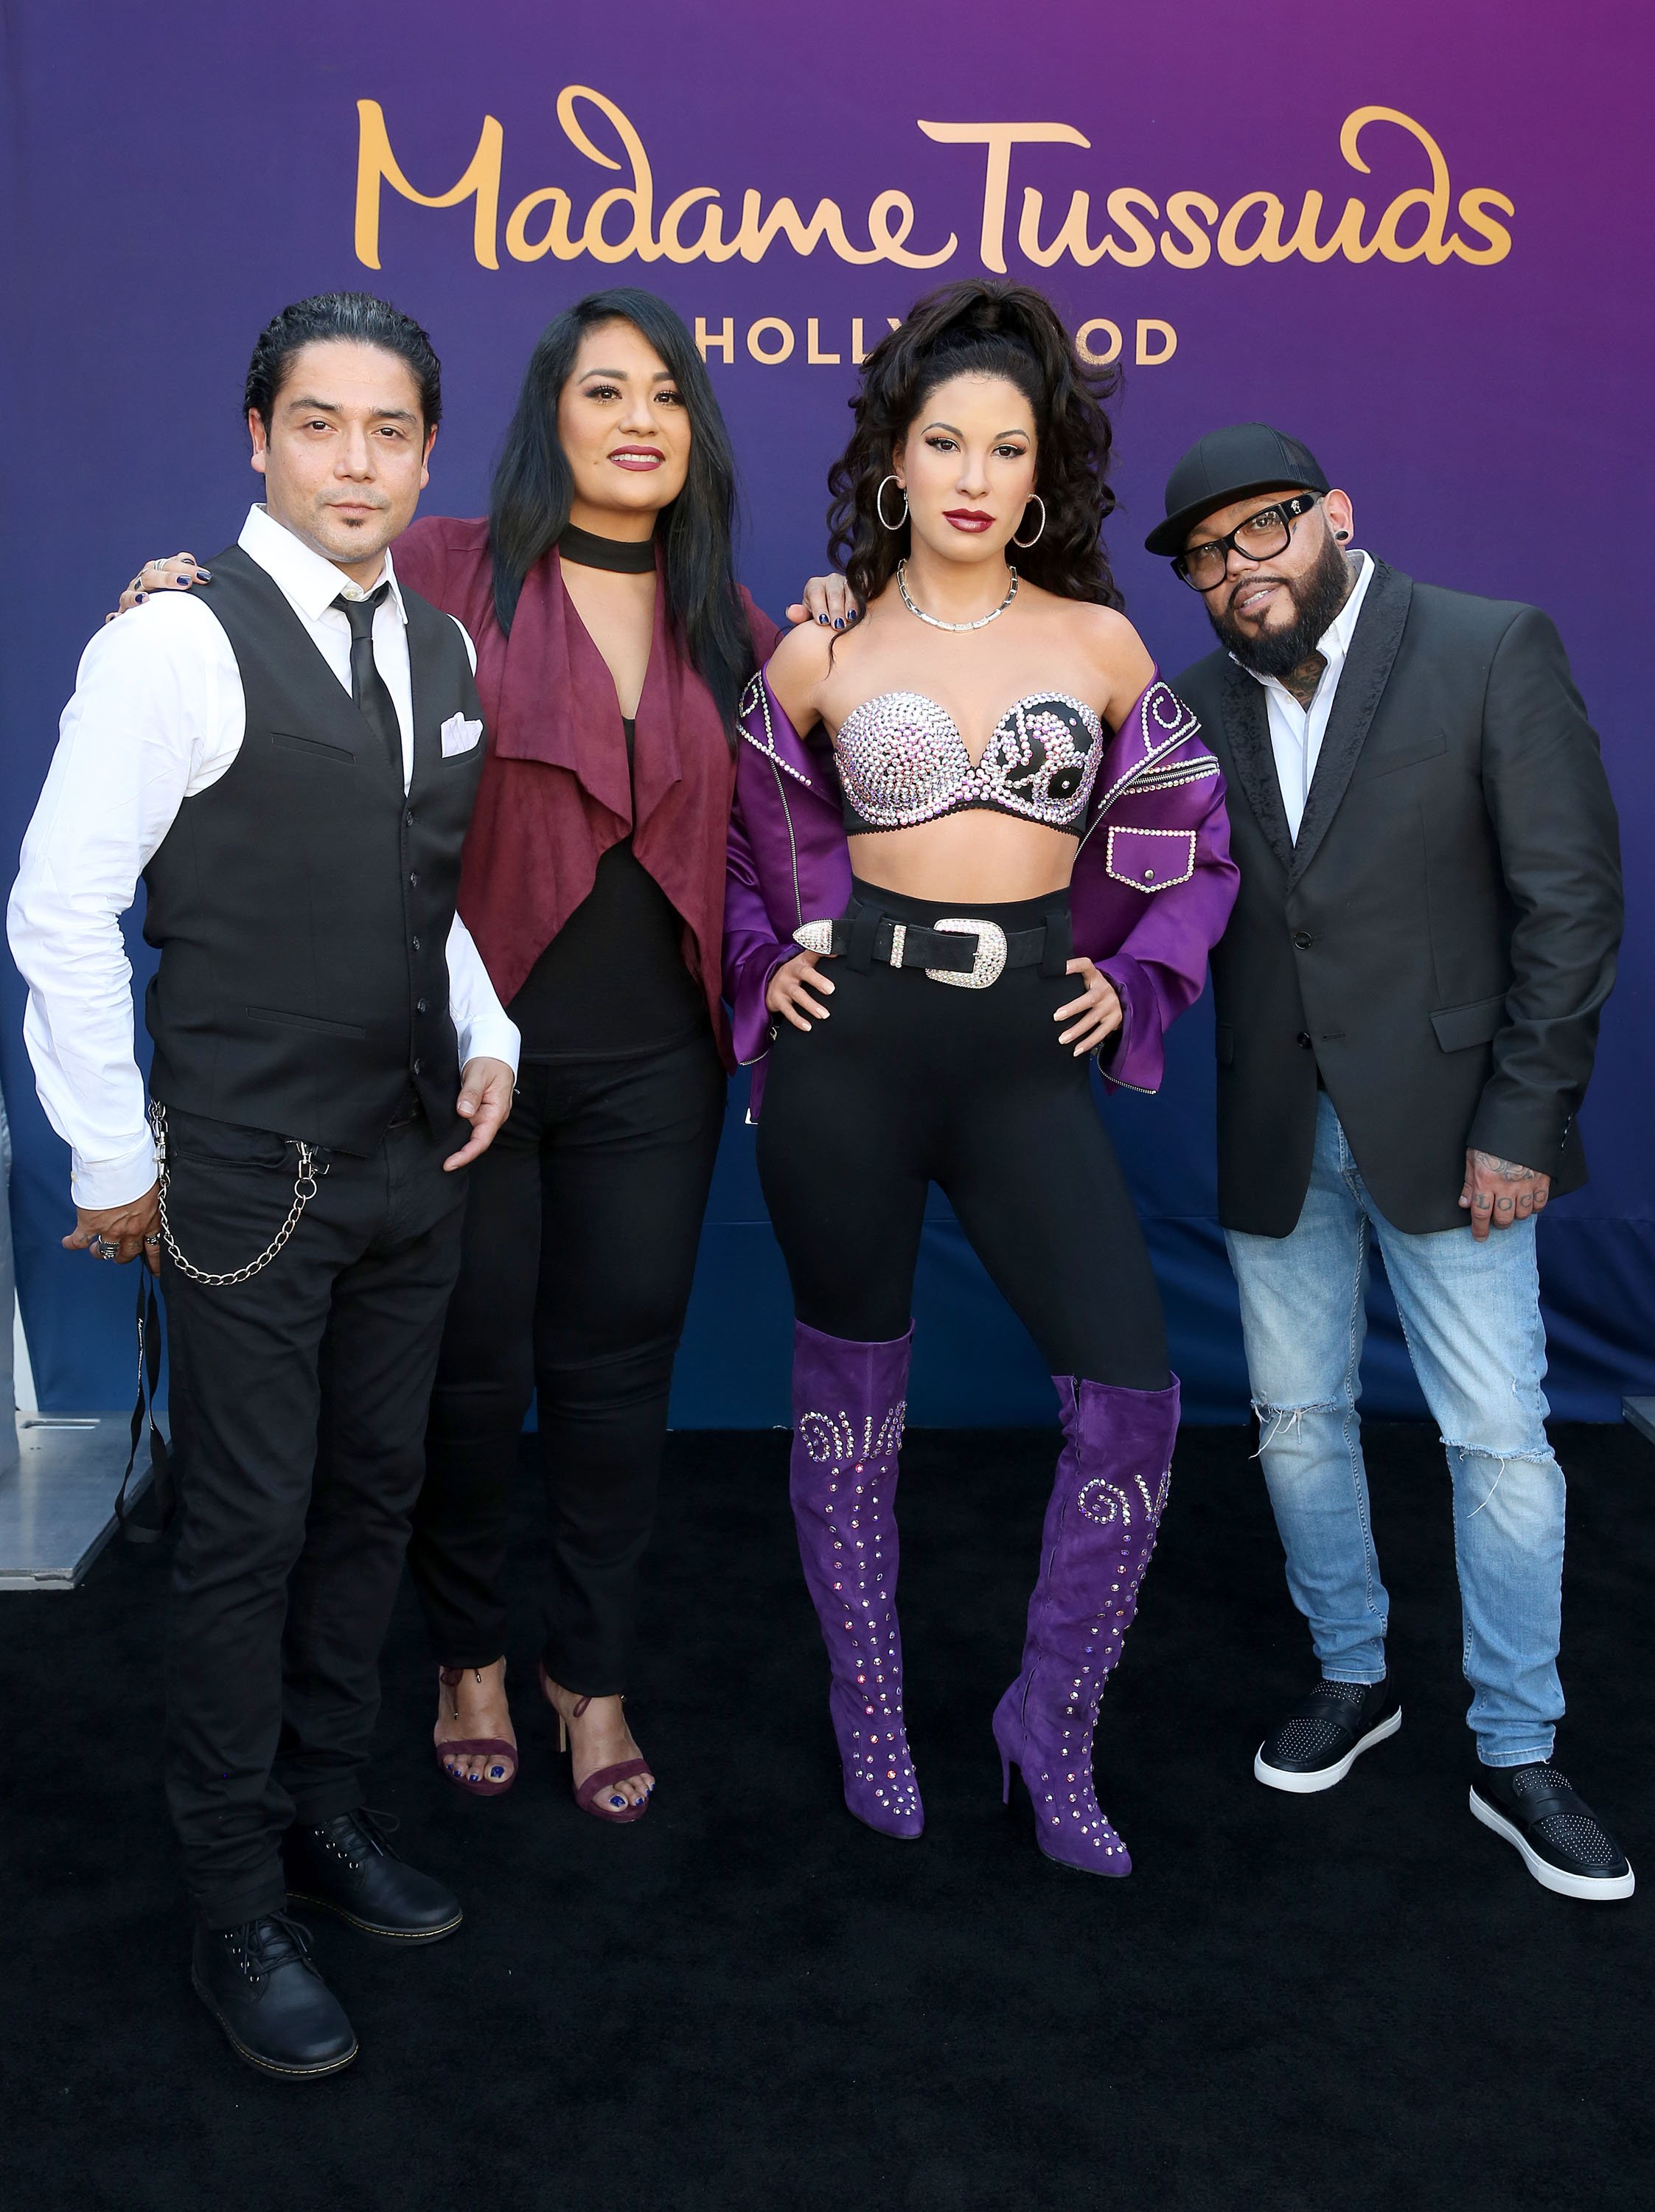 Selena's husband Chris Perez, sister Suzette Quintanilla and brother AB Quintanilla onstage during Madame Tussauds Hollywood's unveiling of Grammy award winner and cultural icon Selena Quintanilla immortalized in wax at Madame Tussauds on August 30, 2016 in Hollywood, California. | Photo: Getty Images